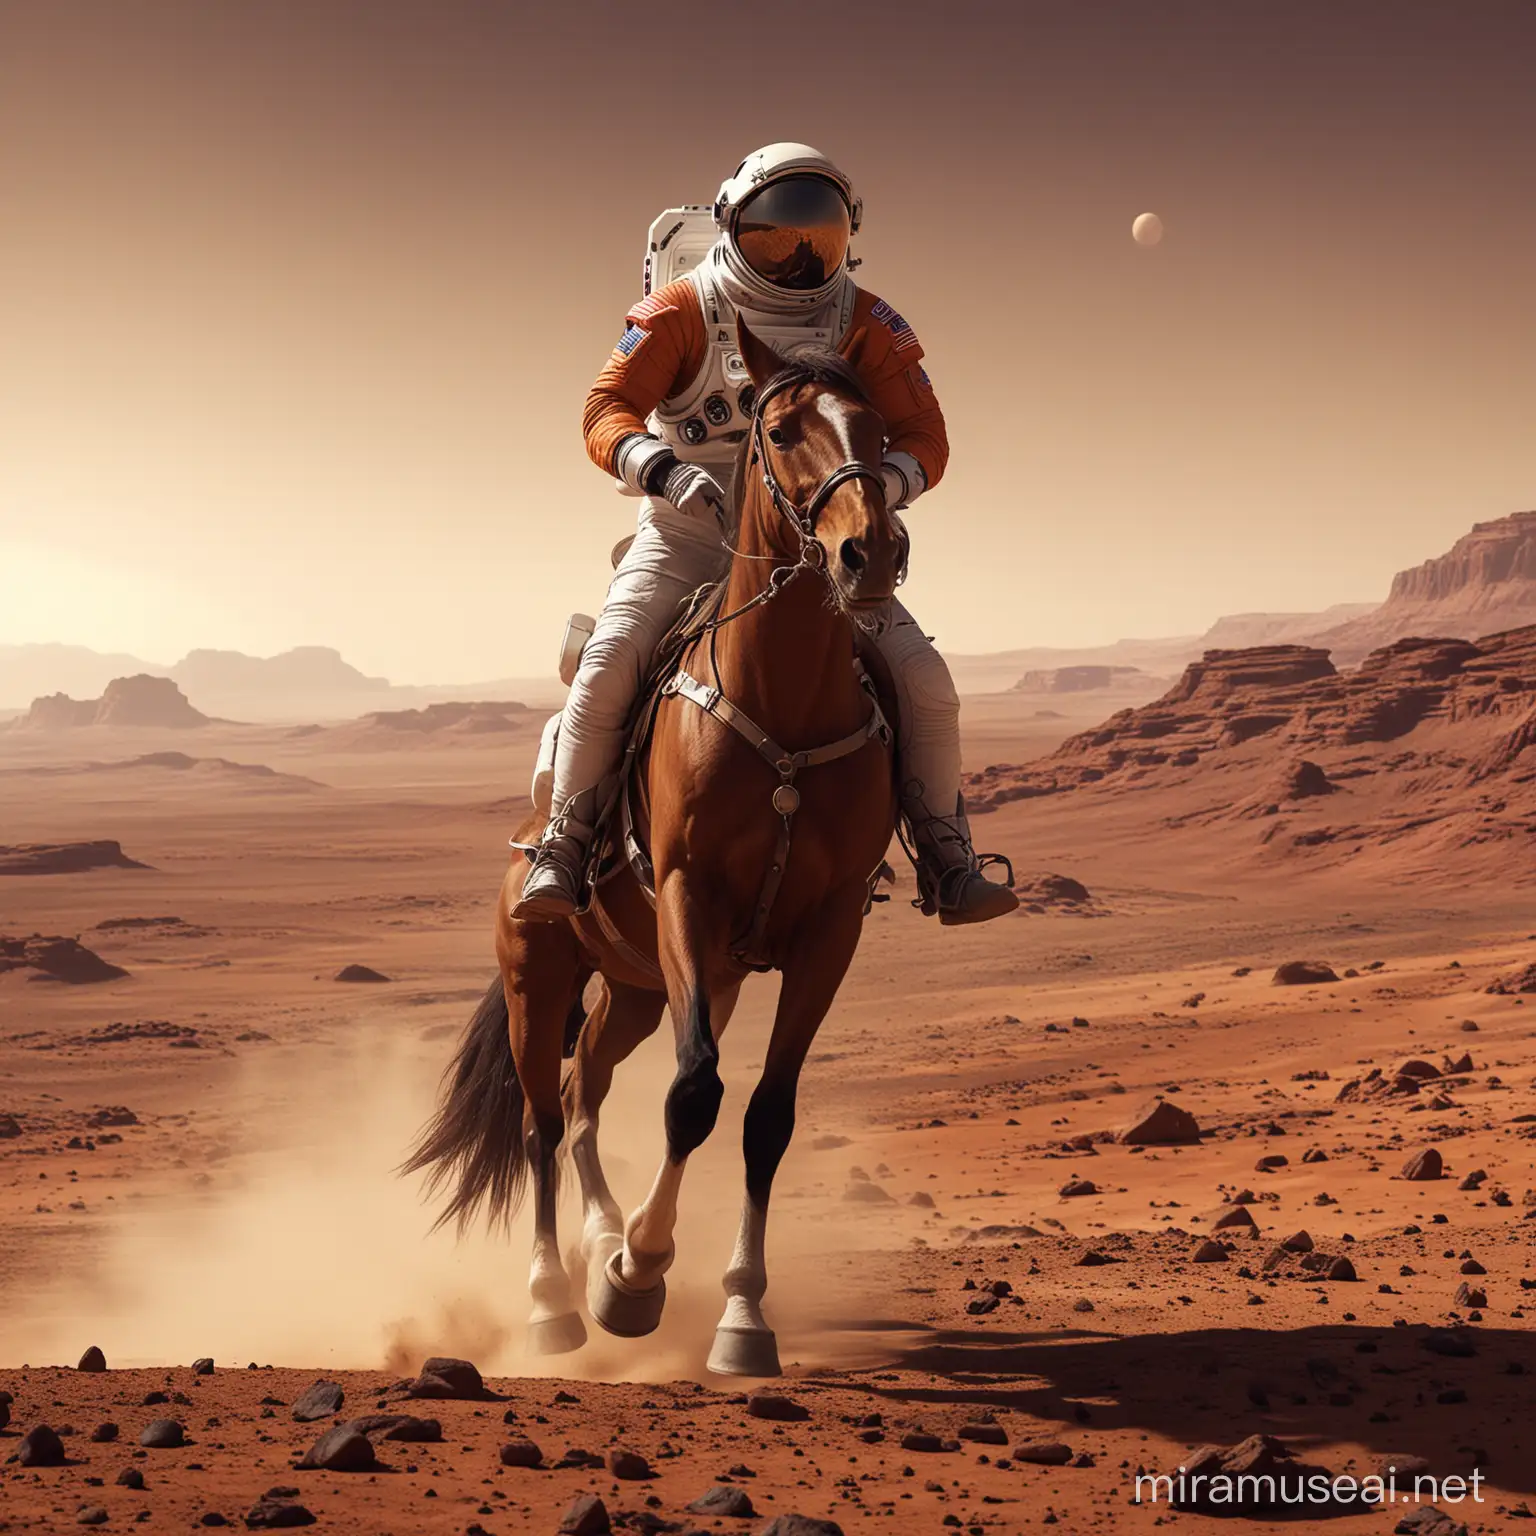 astronaut riding a horse on mars, hd, dramatic lighting, detailed